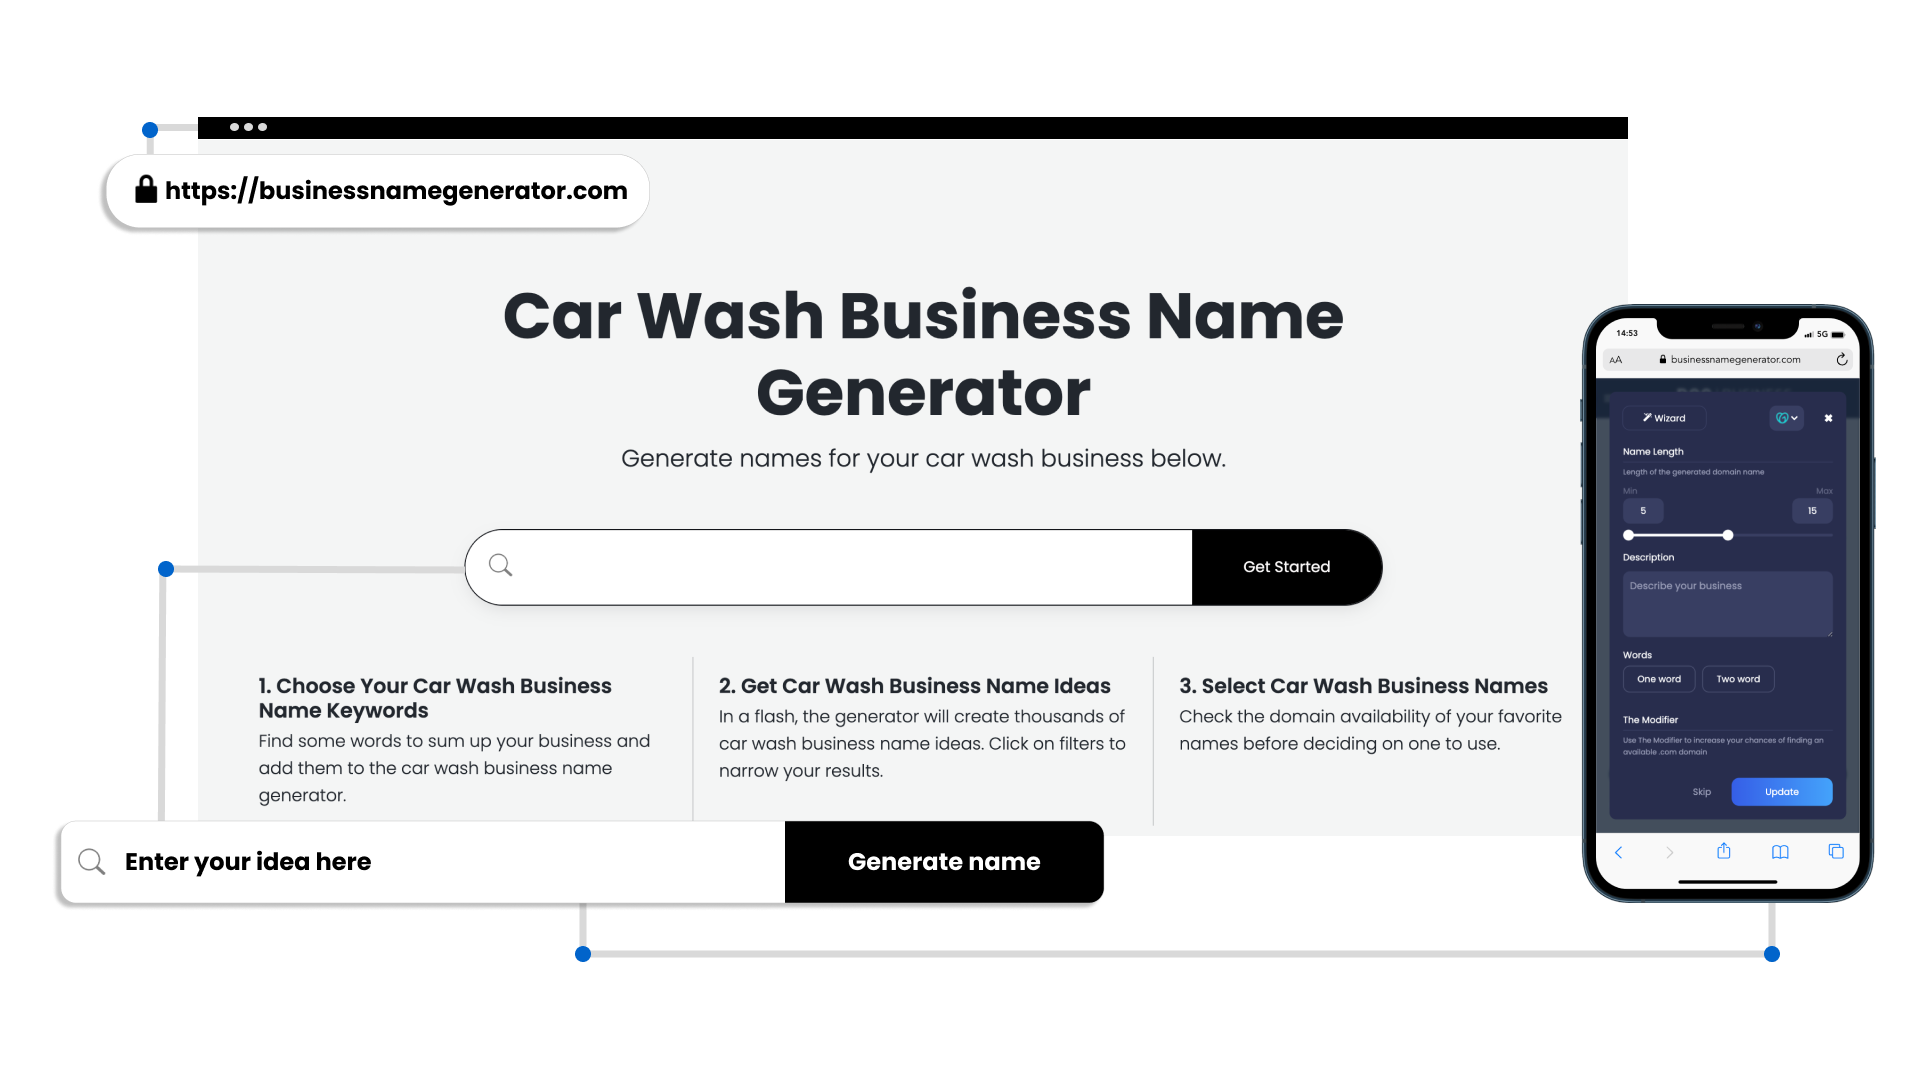 How to use our Car Wash Business Name Generator